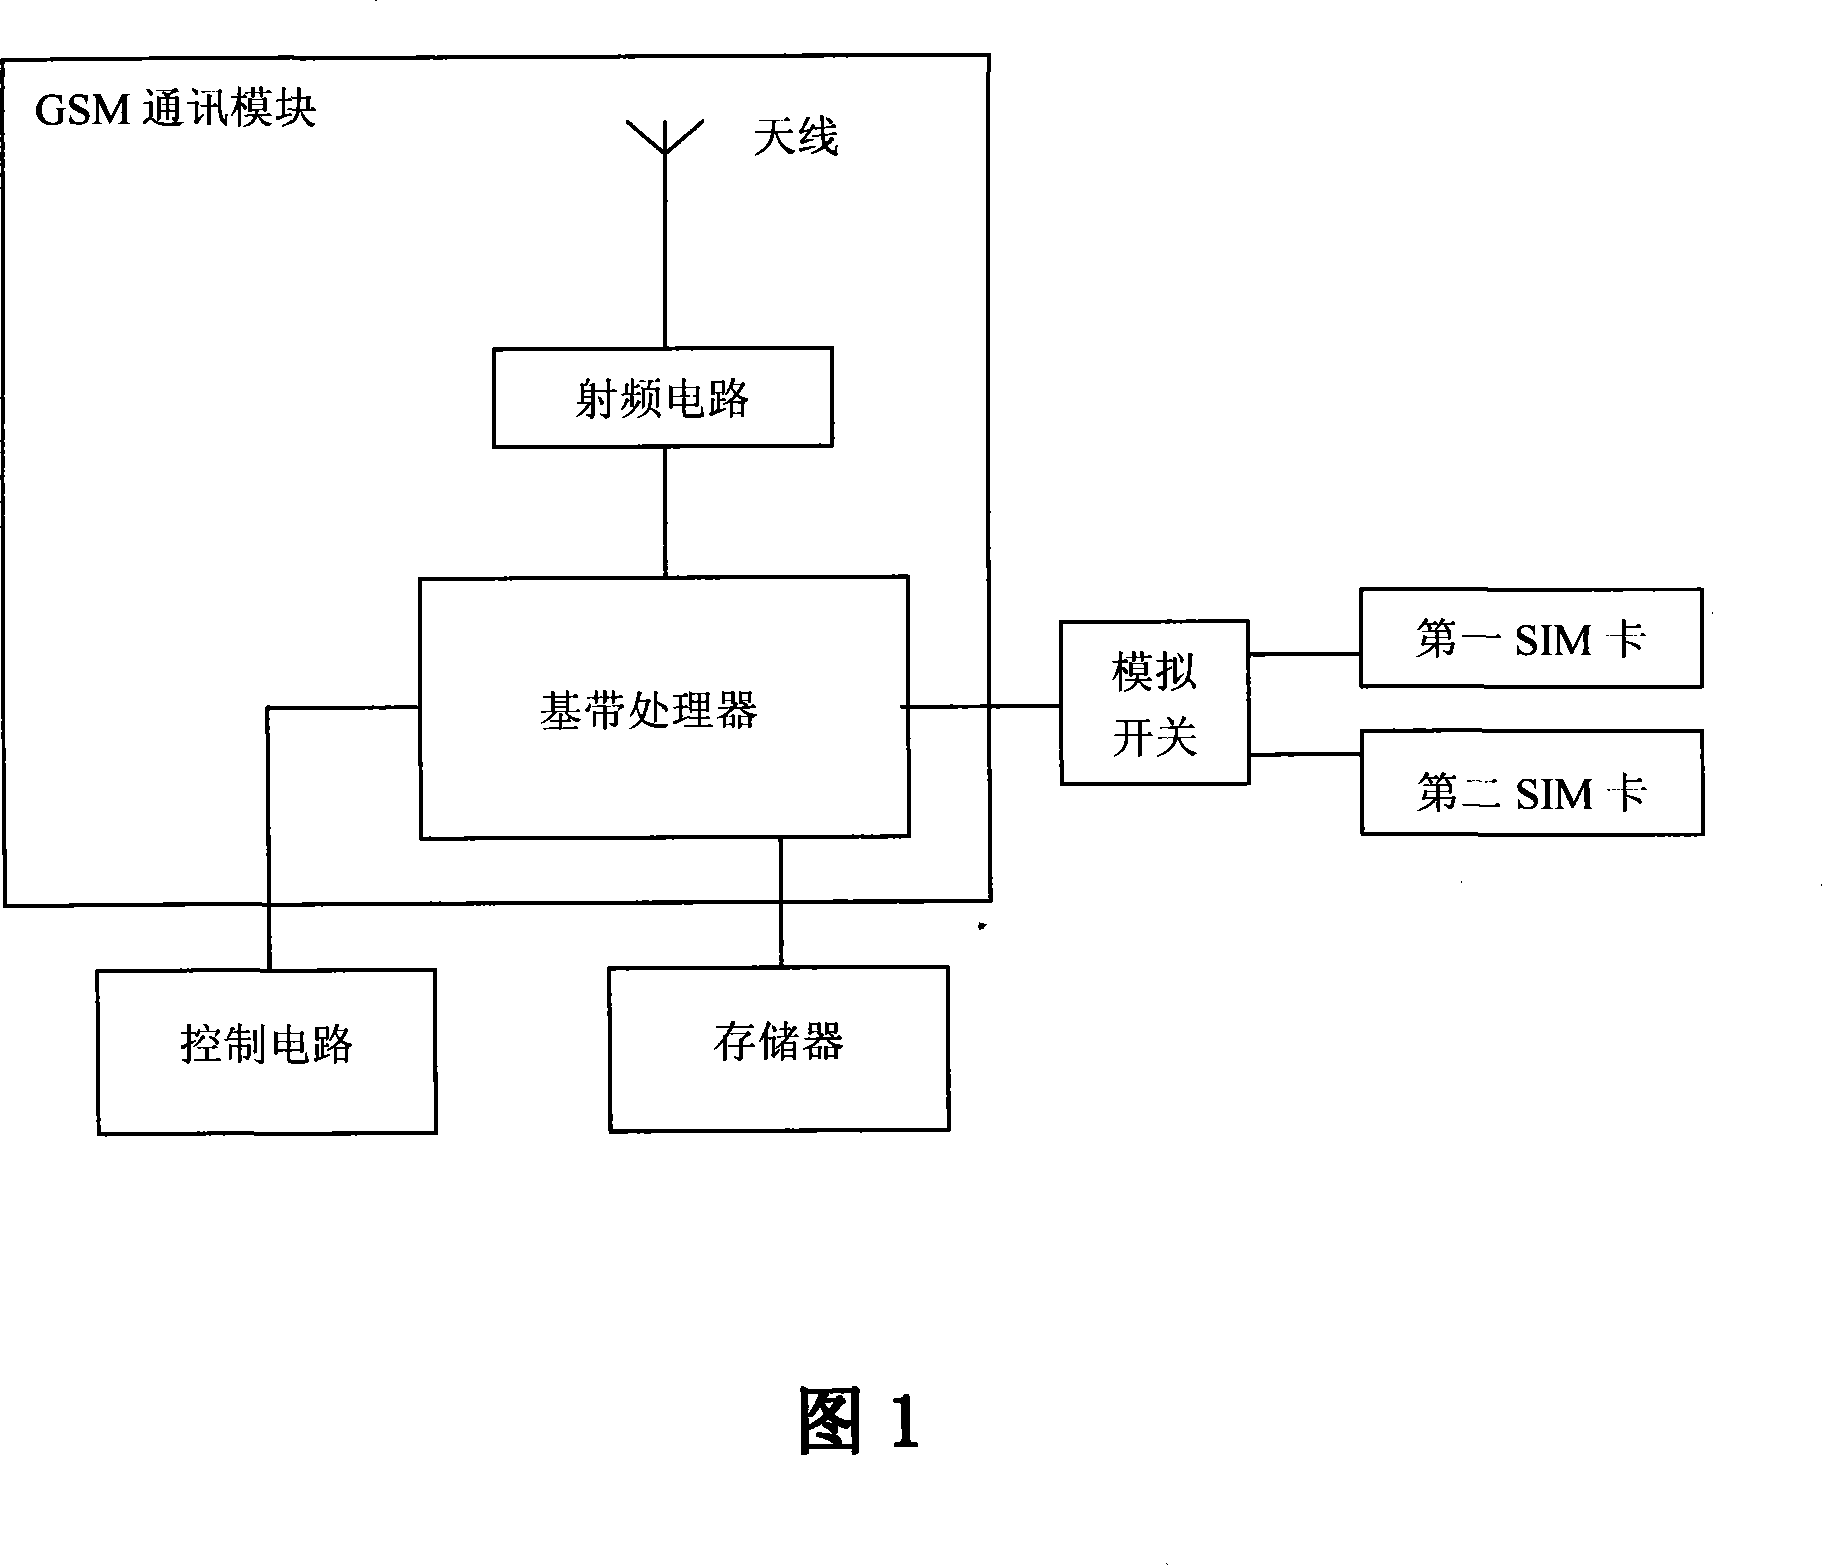 Method of updating start-up position area of multi-card mobile terminal with single GSM communication module